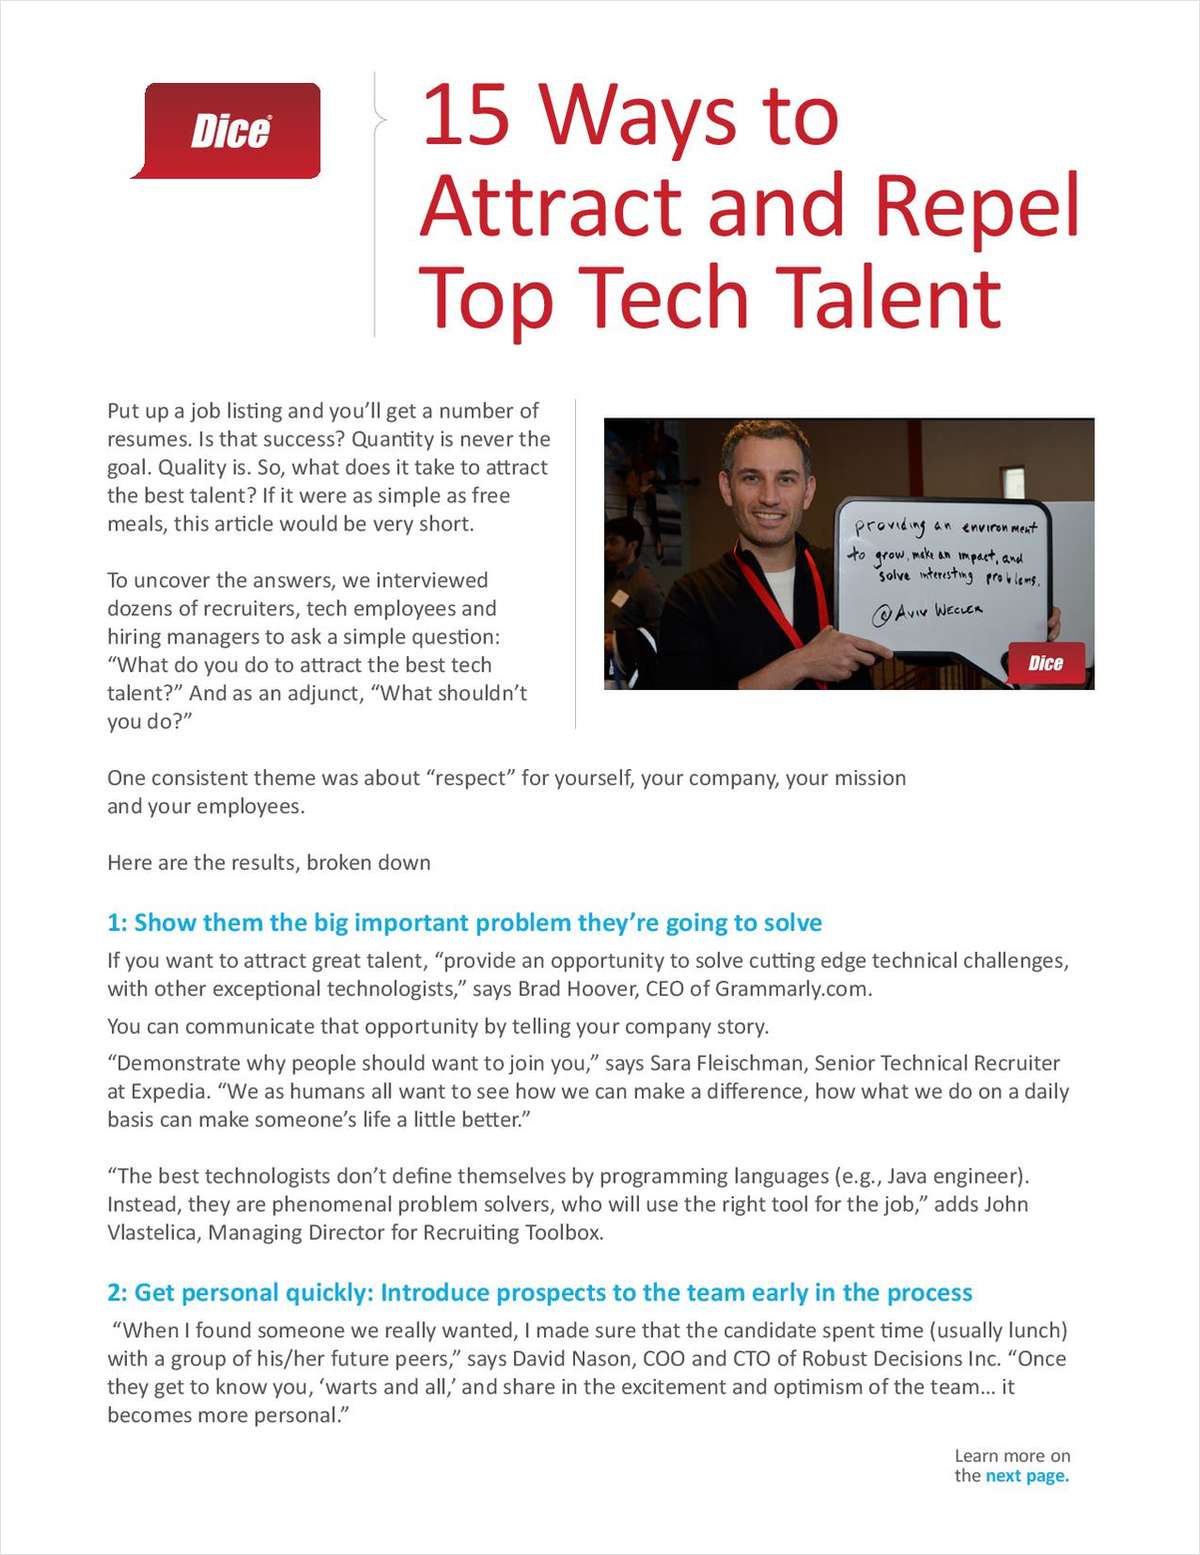 15 Ways to Attract and Repel Top Tech Talent